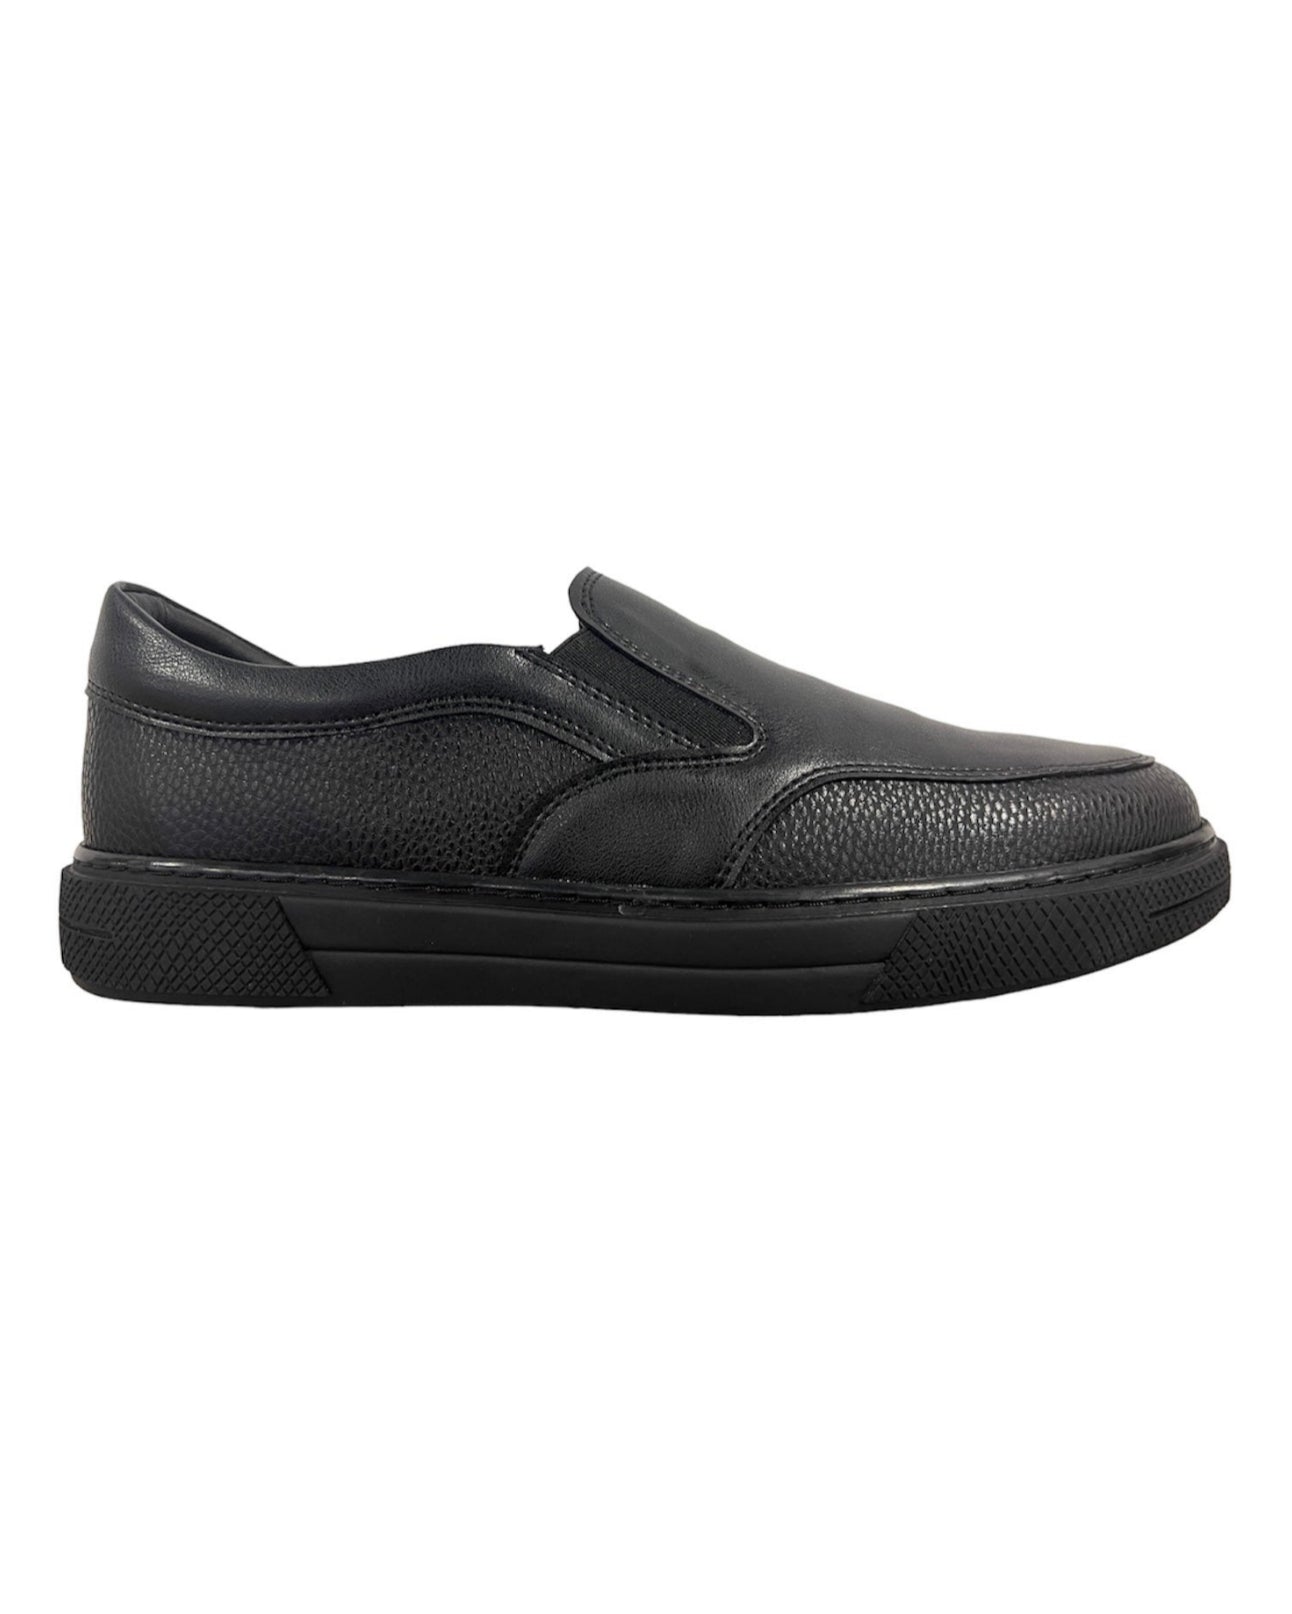 SALE! 2H #9528 Full Black Casual Shoes